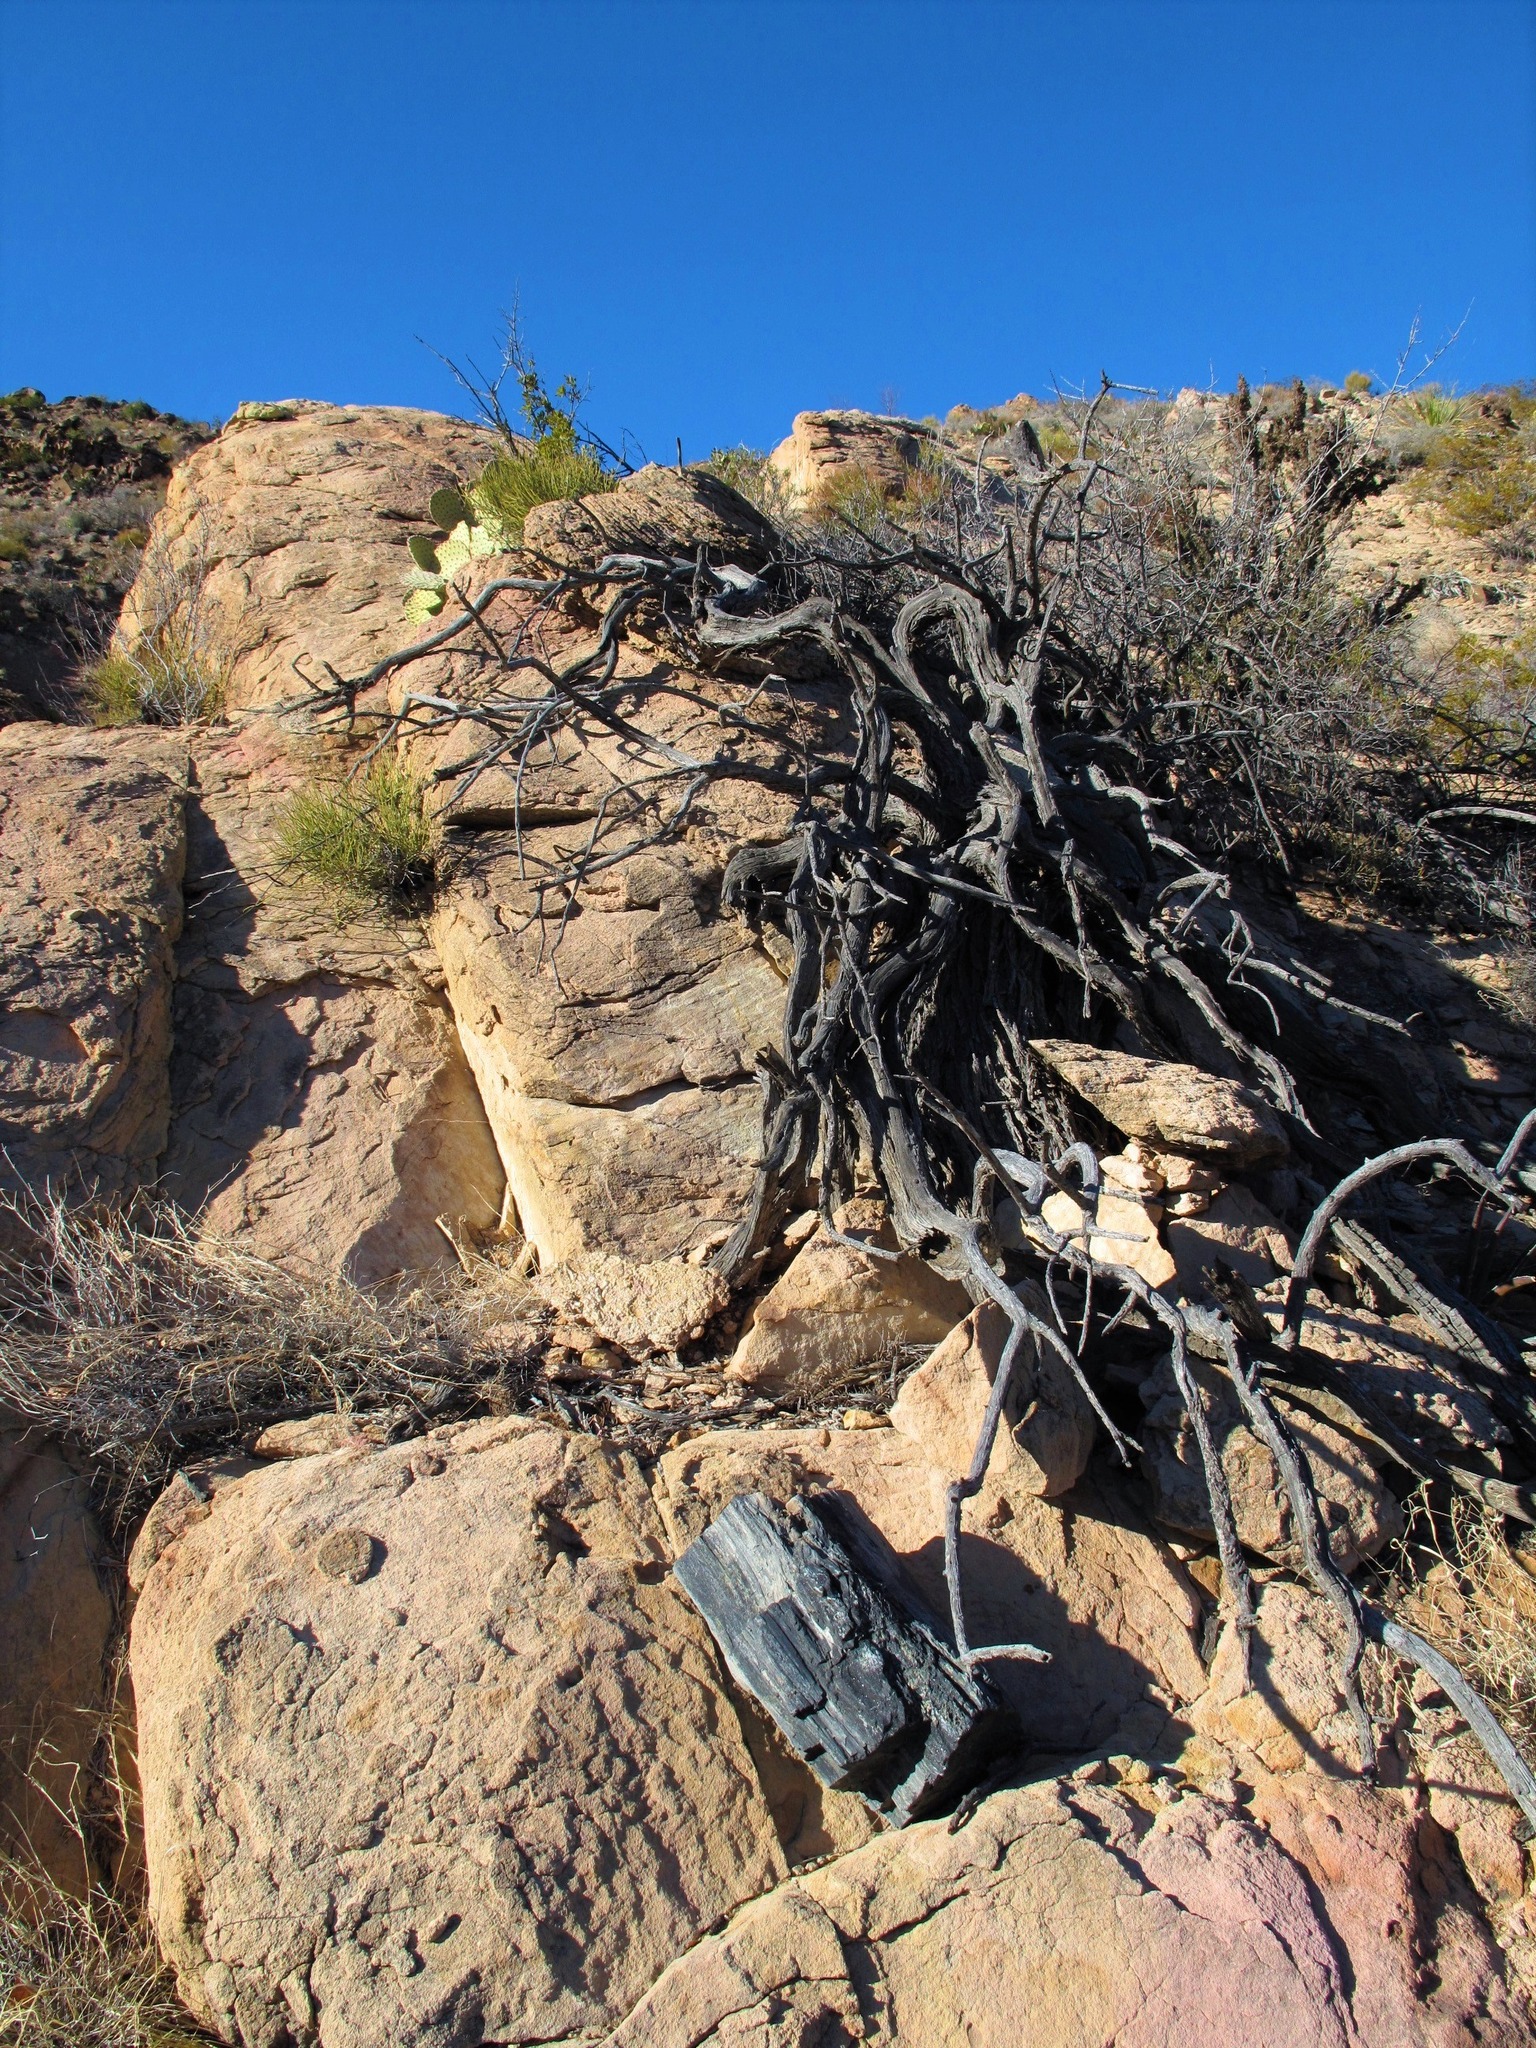 Dead mesquite tree growing out of a solid rock cliff face